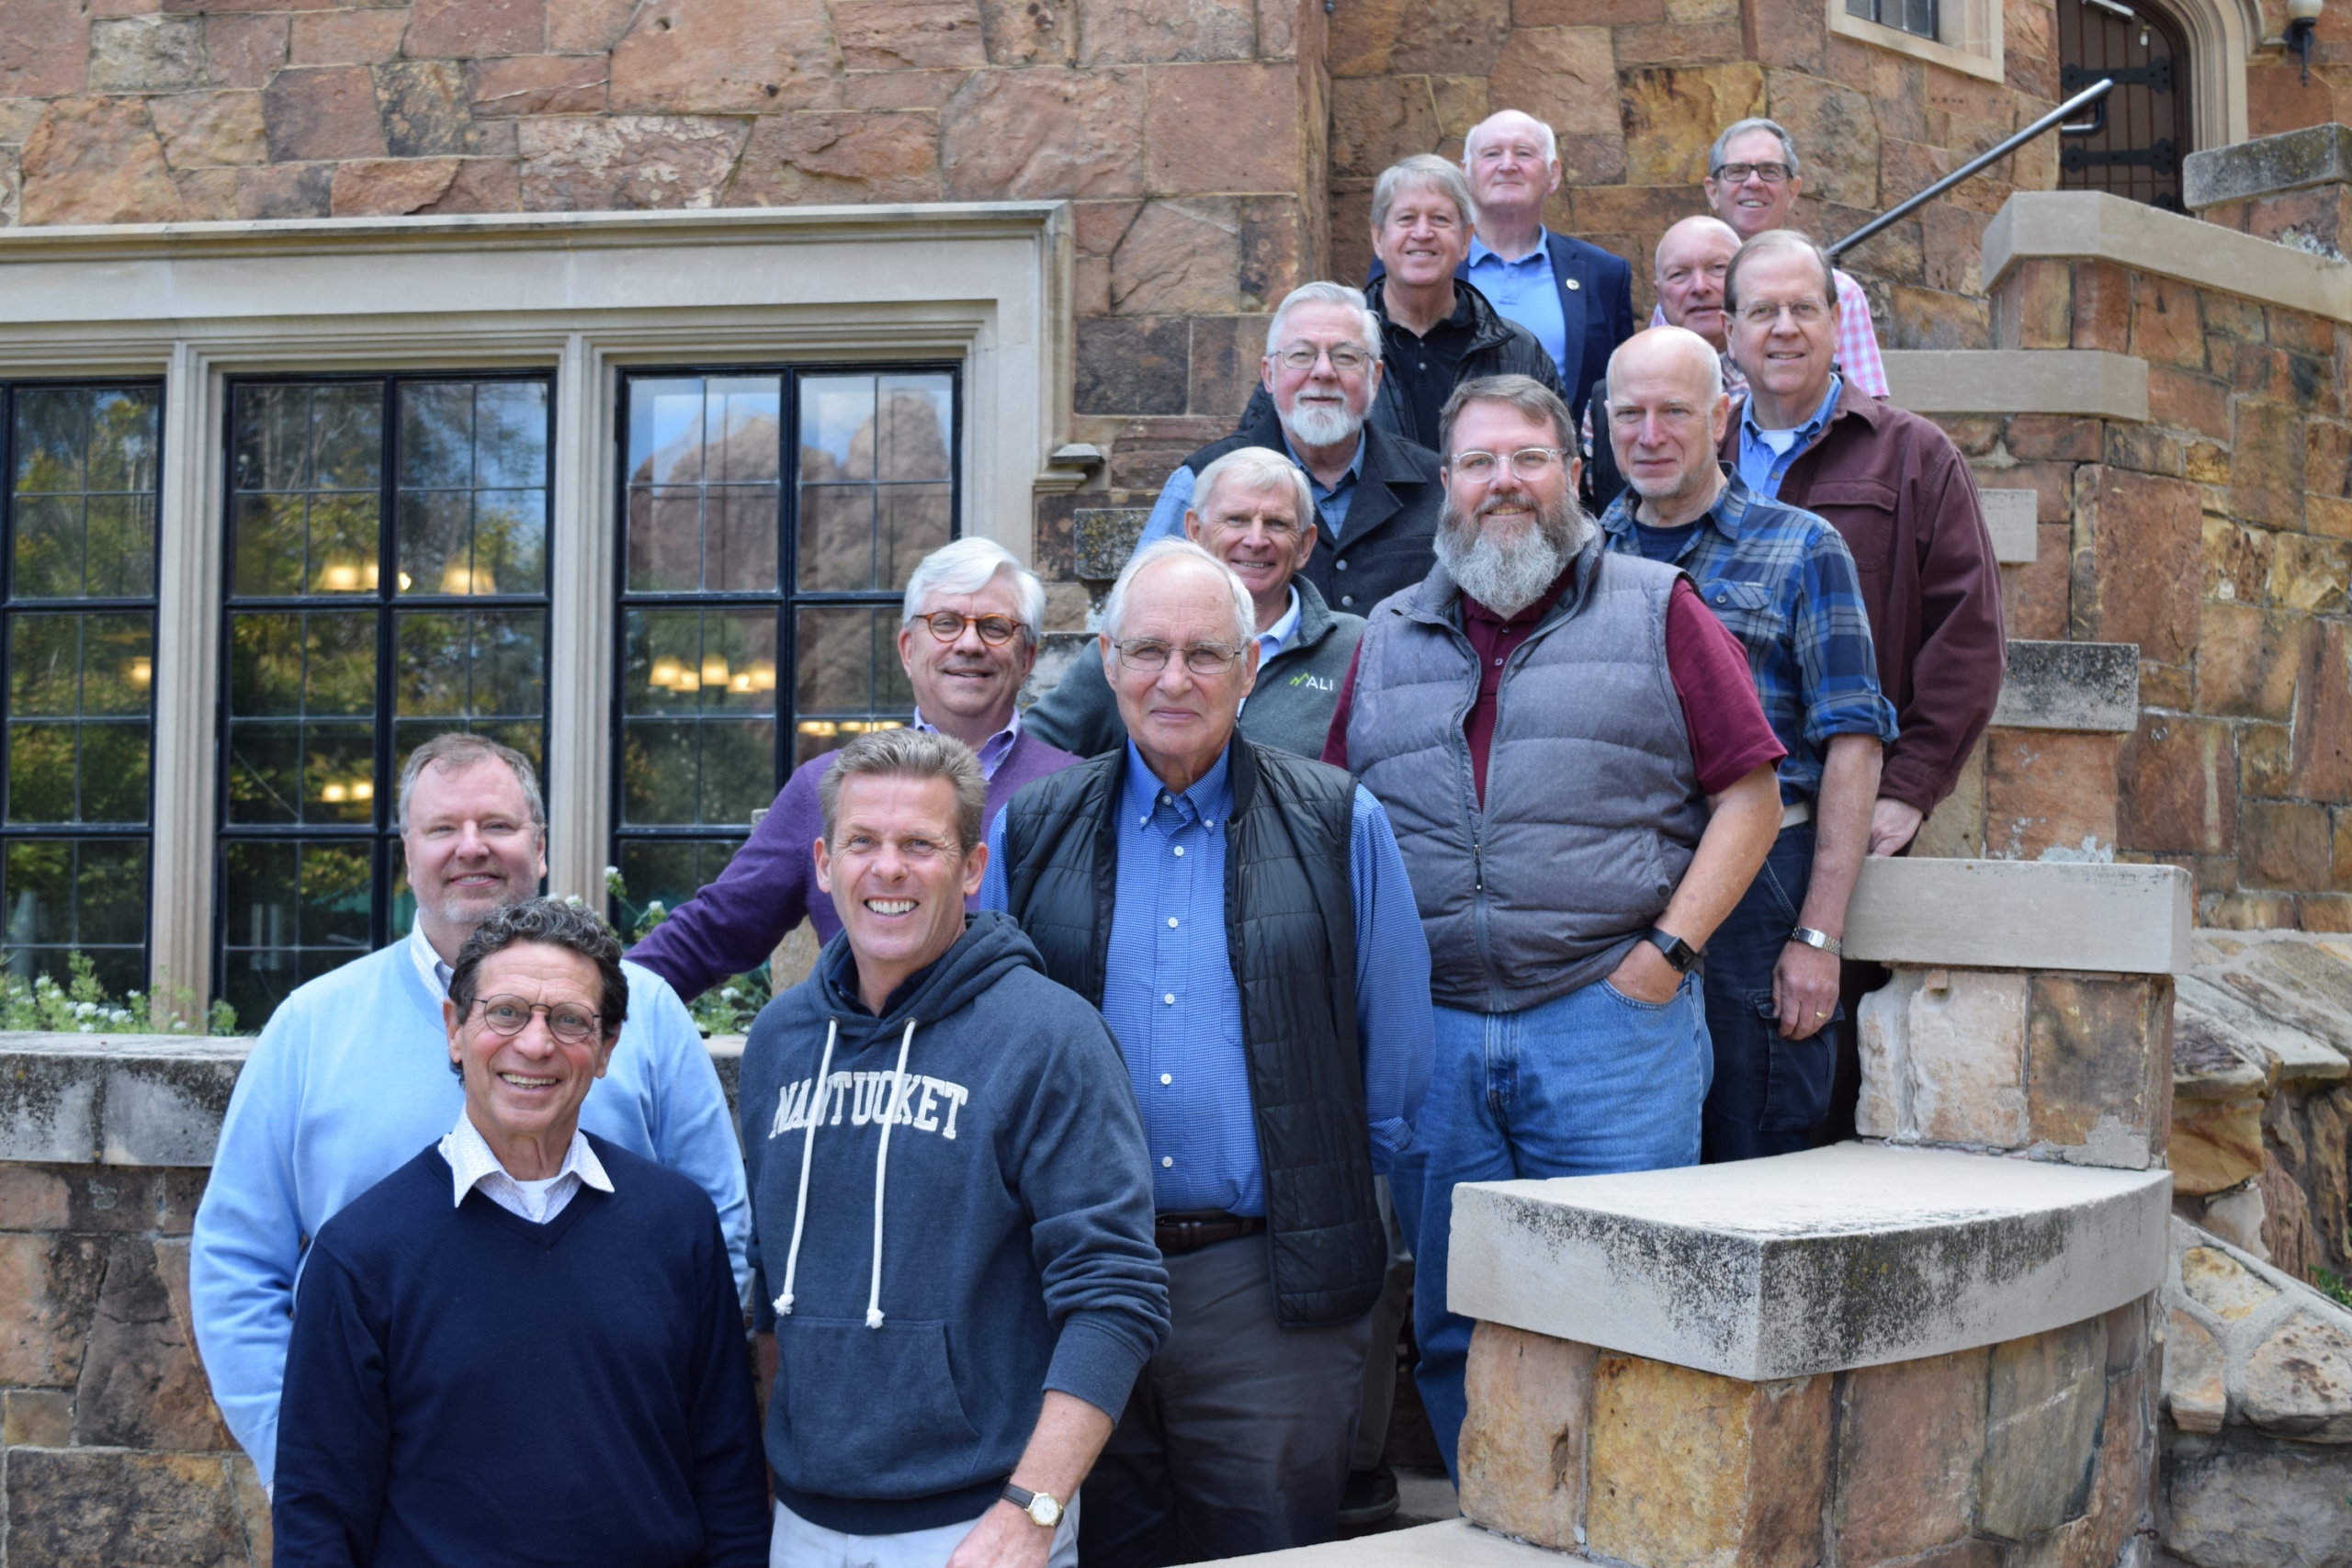 The ACNA Continues on Towards Unity and Maturity